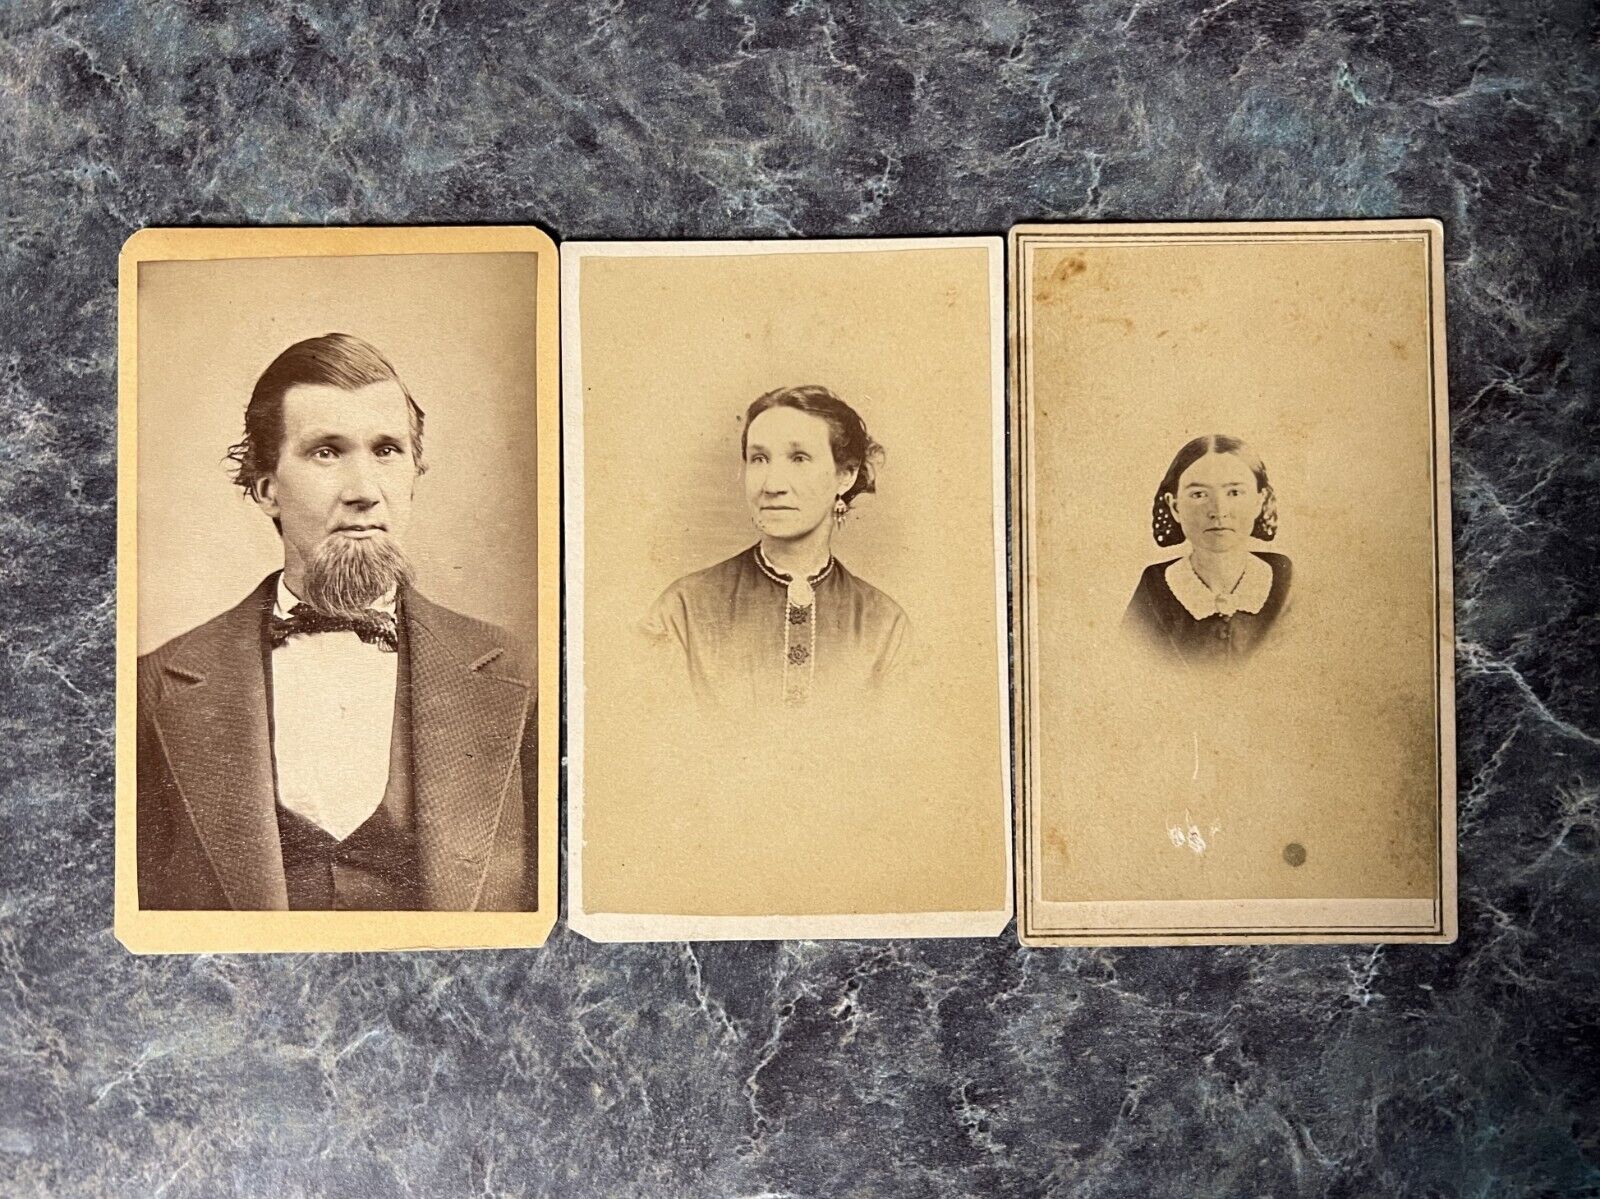 Lot of 3 Carte de Visite CDV Photos with St. Louis Backmarks - 1860s and 1870s